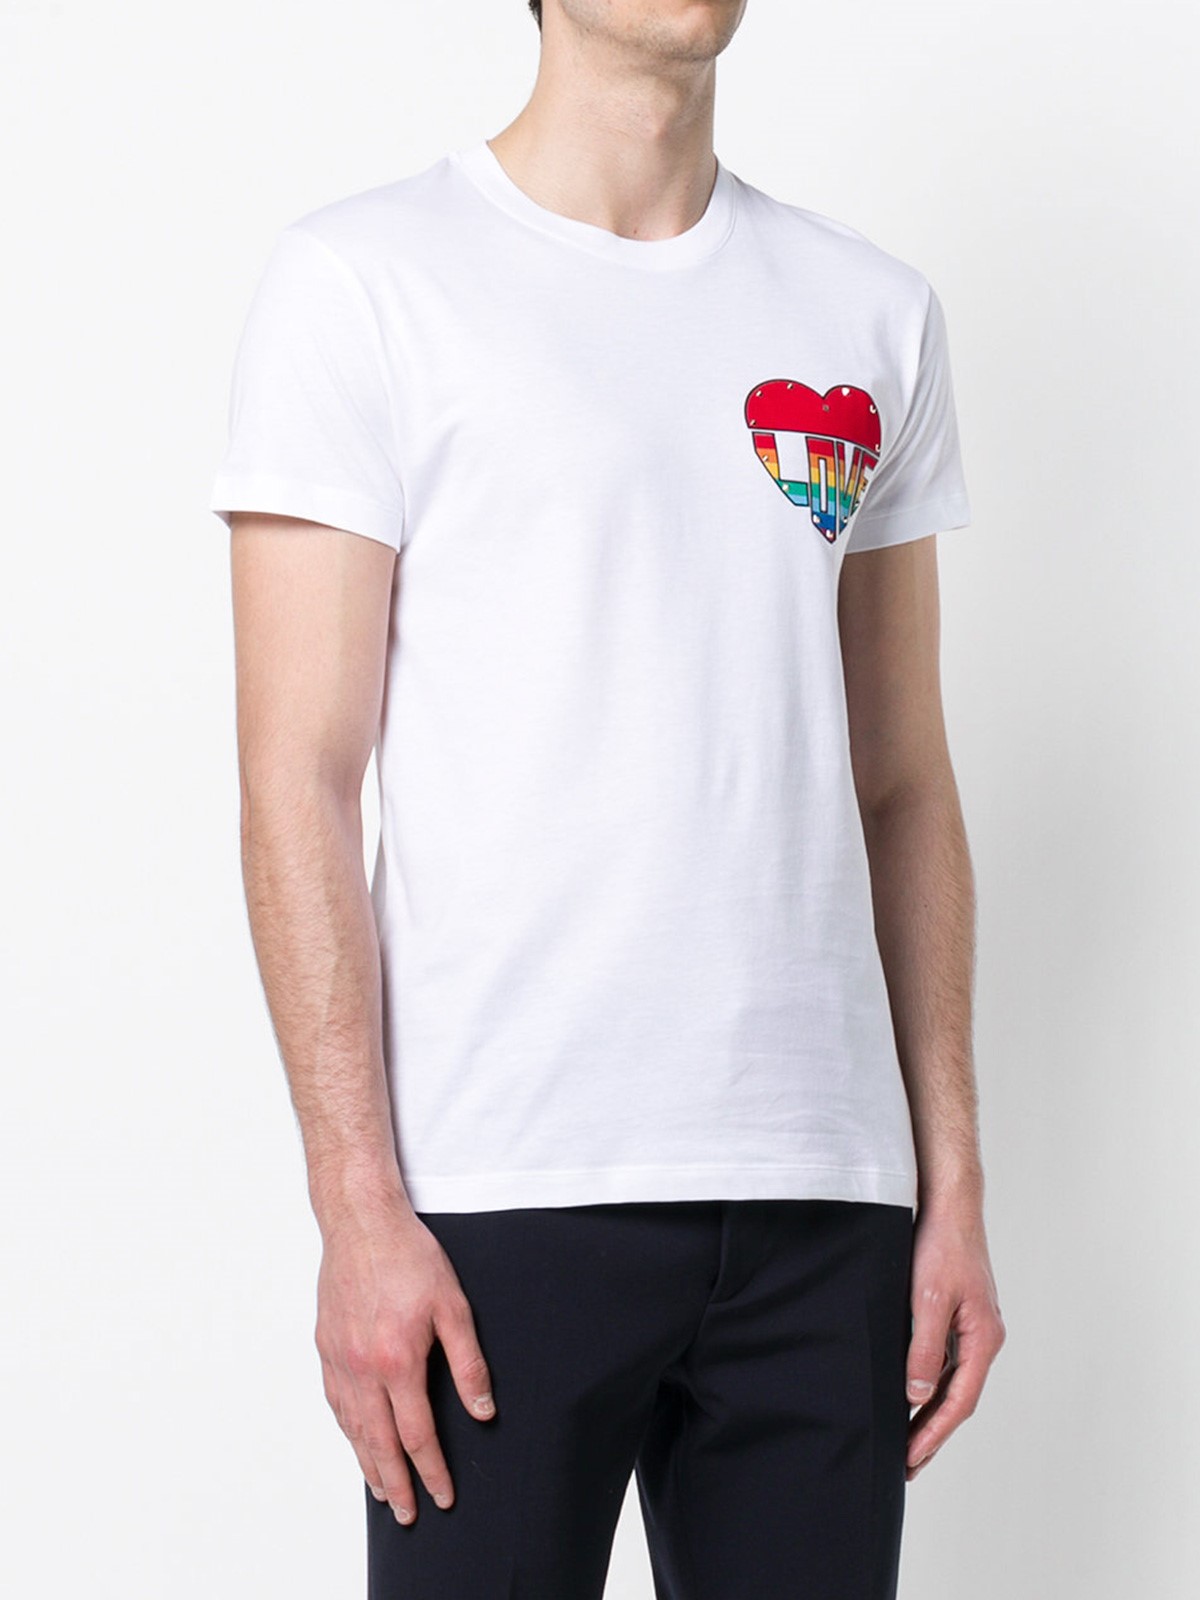 valentino LOVE T-SHIRT available on montiboutique.com - 22624